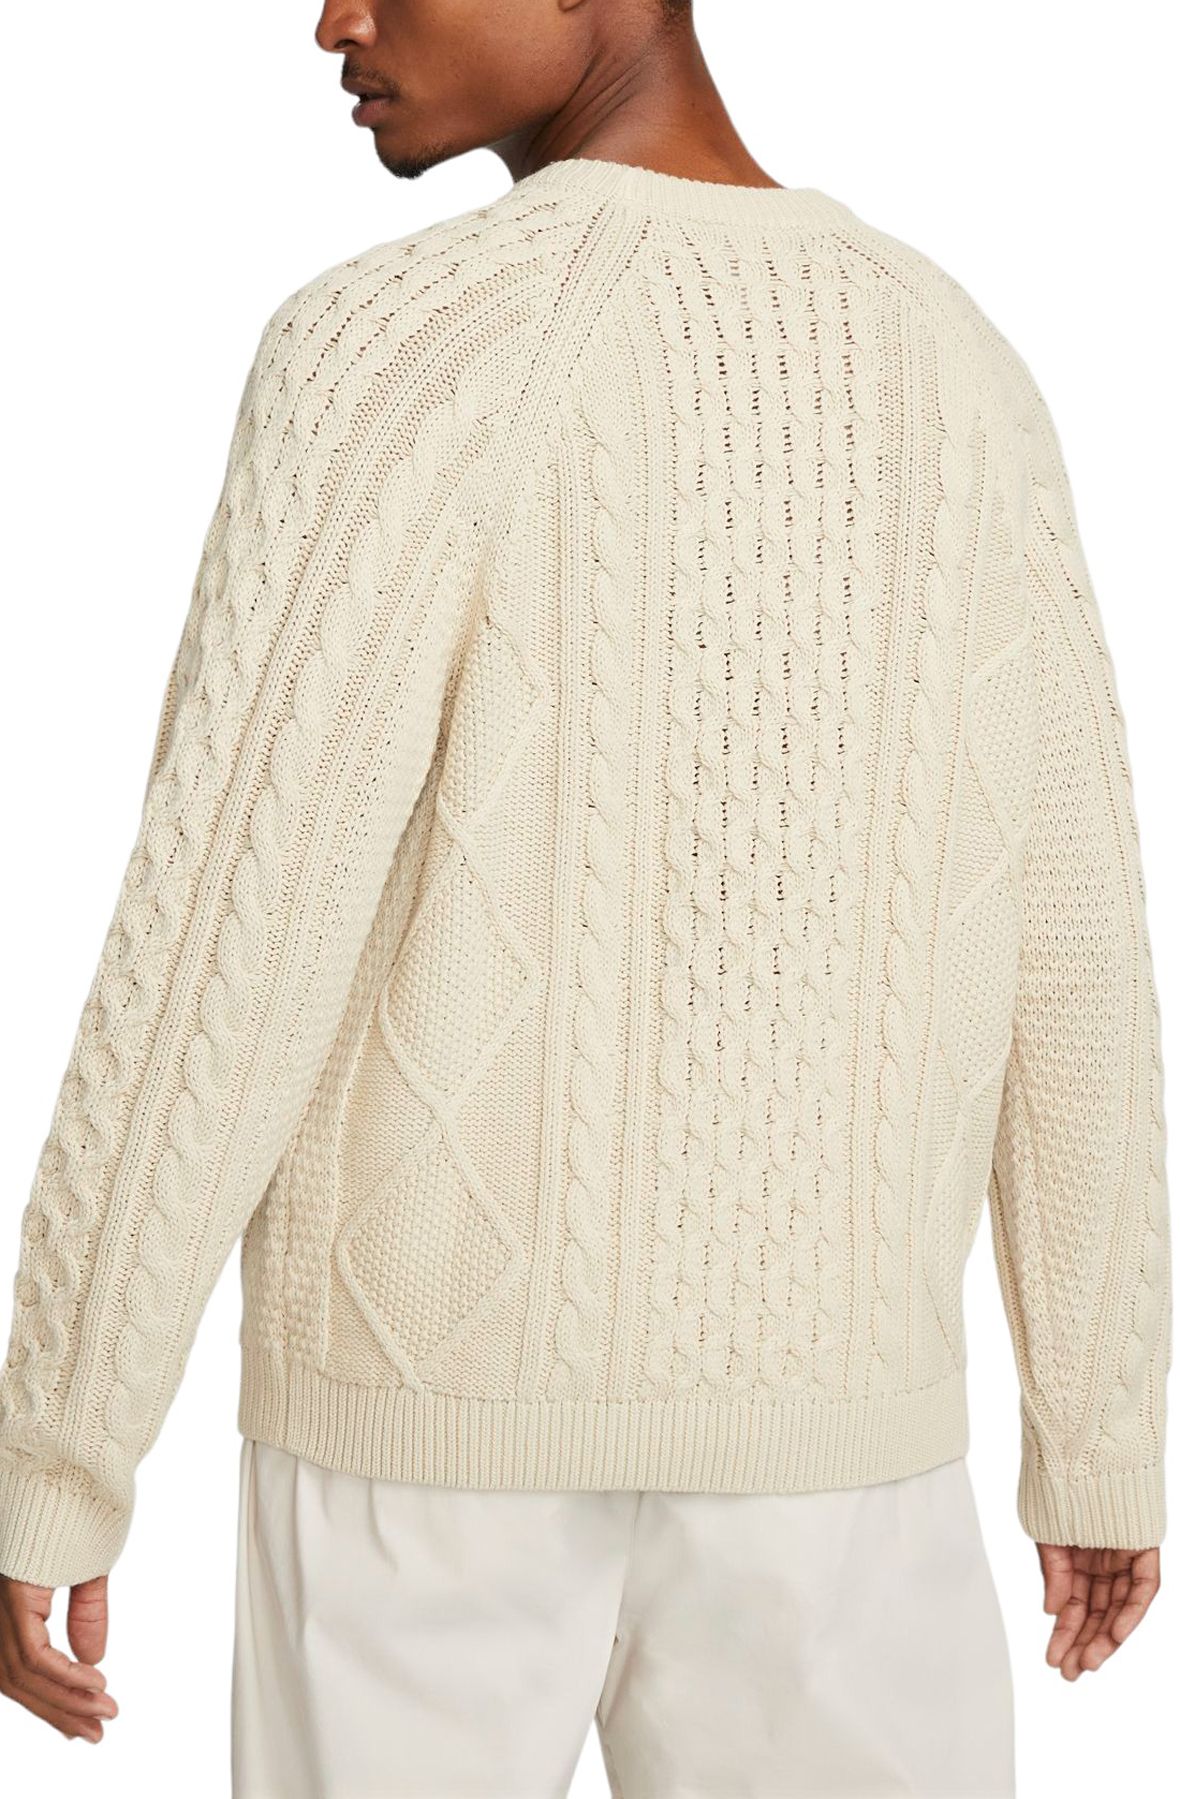 SPORTSWEAR CABLE KNIT SWEATER DQ5176 206